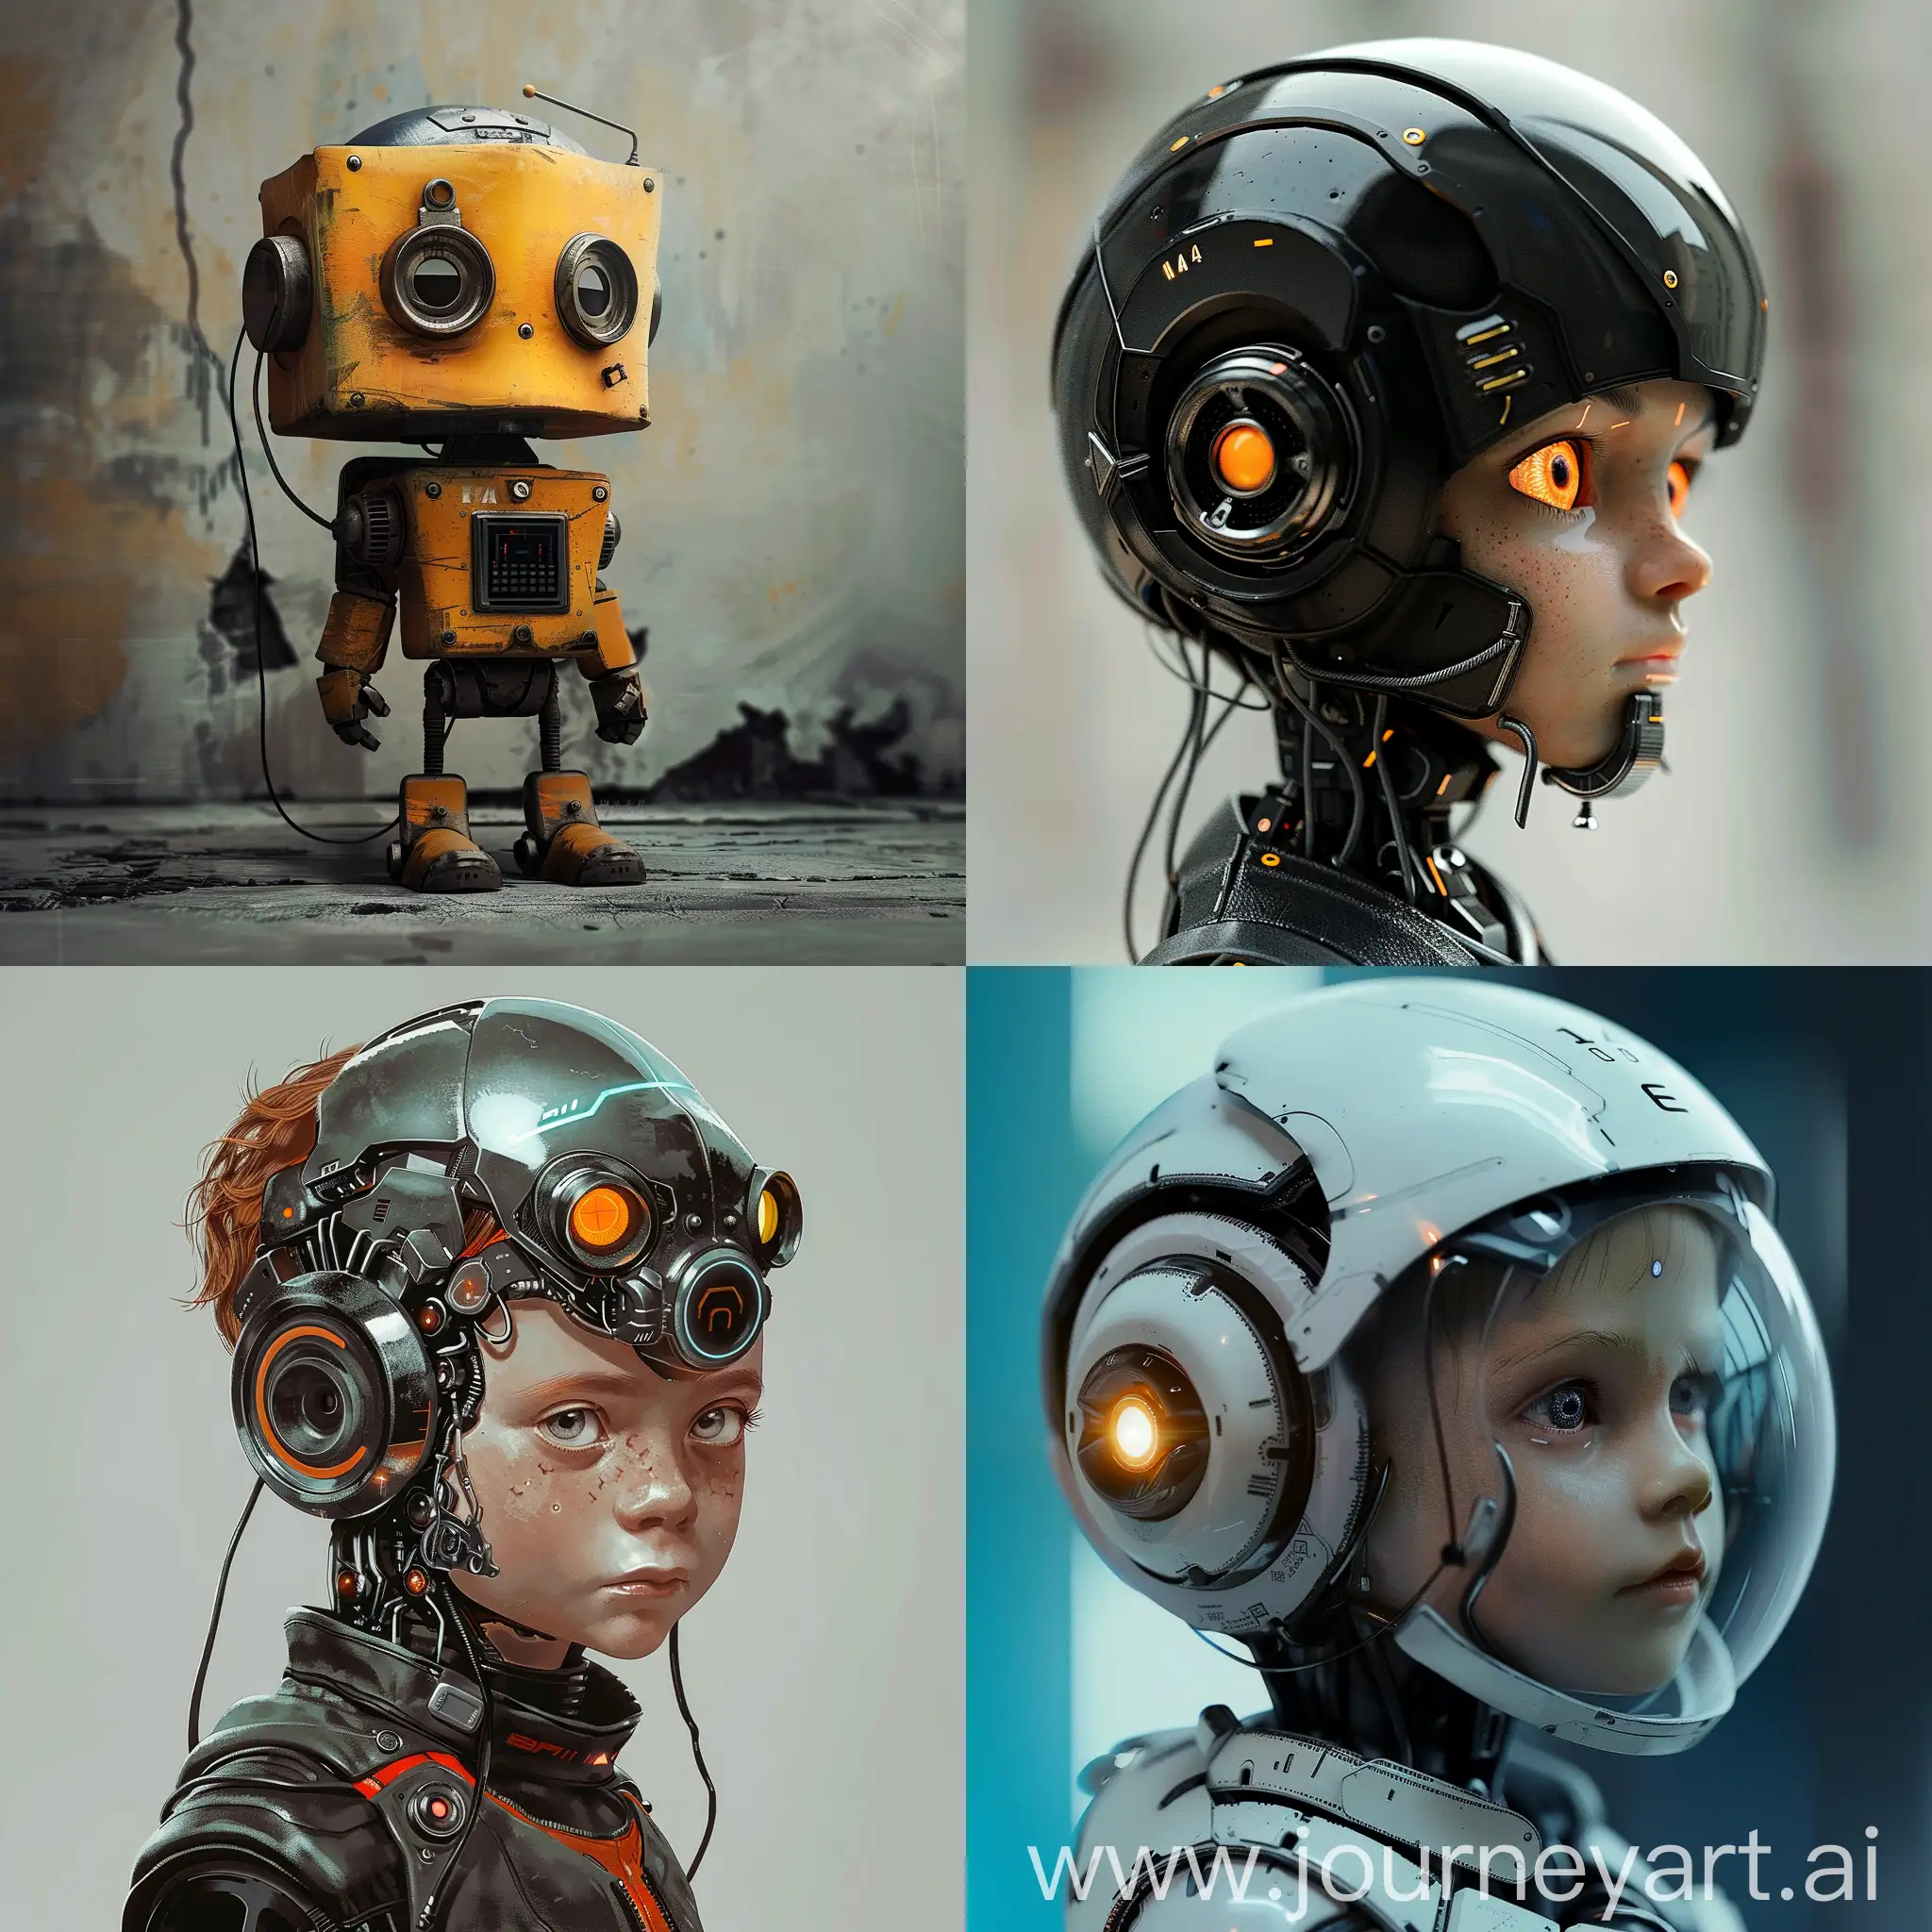 Futuristic-Robot-Boy-Standing-Tall-in-Technological-Landscape